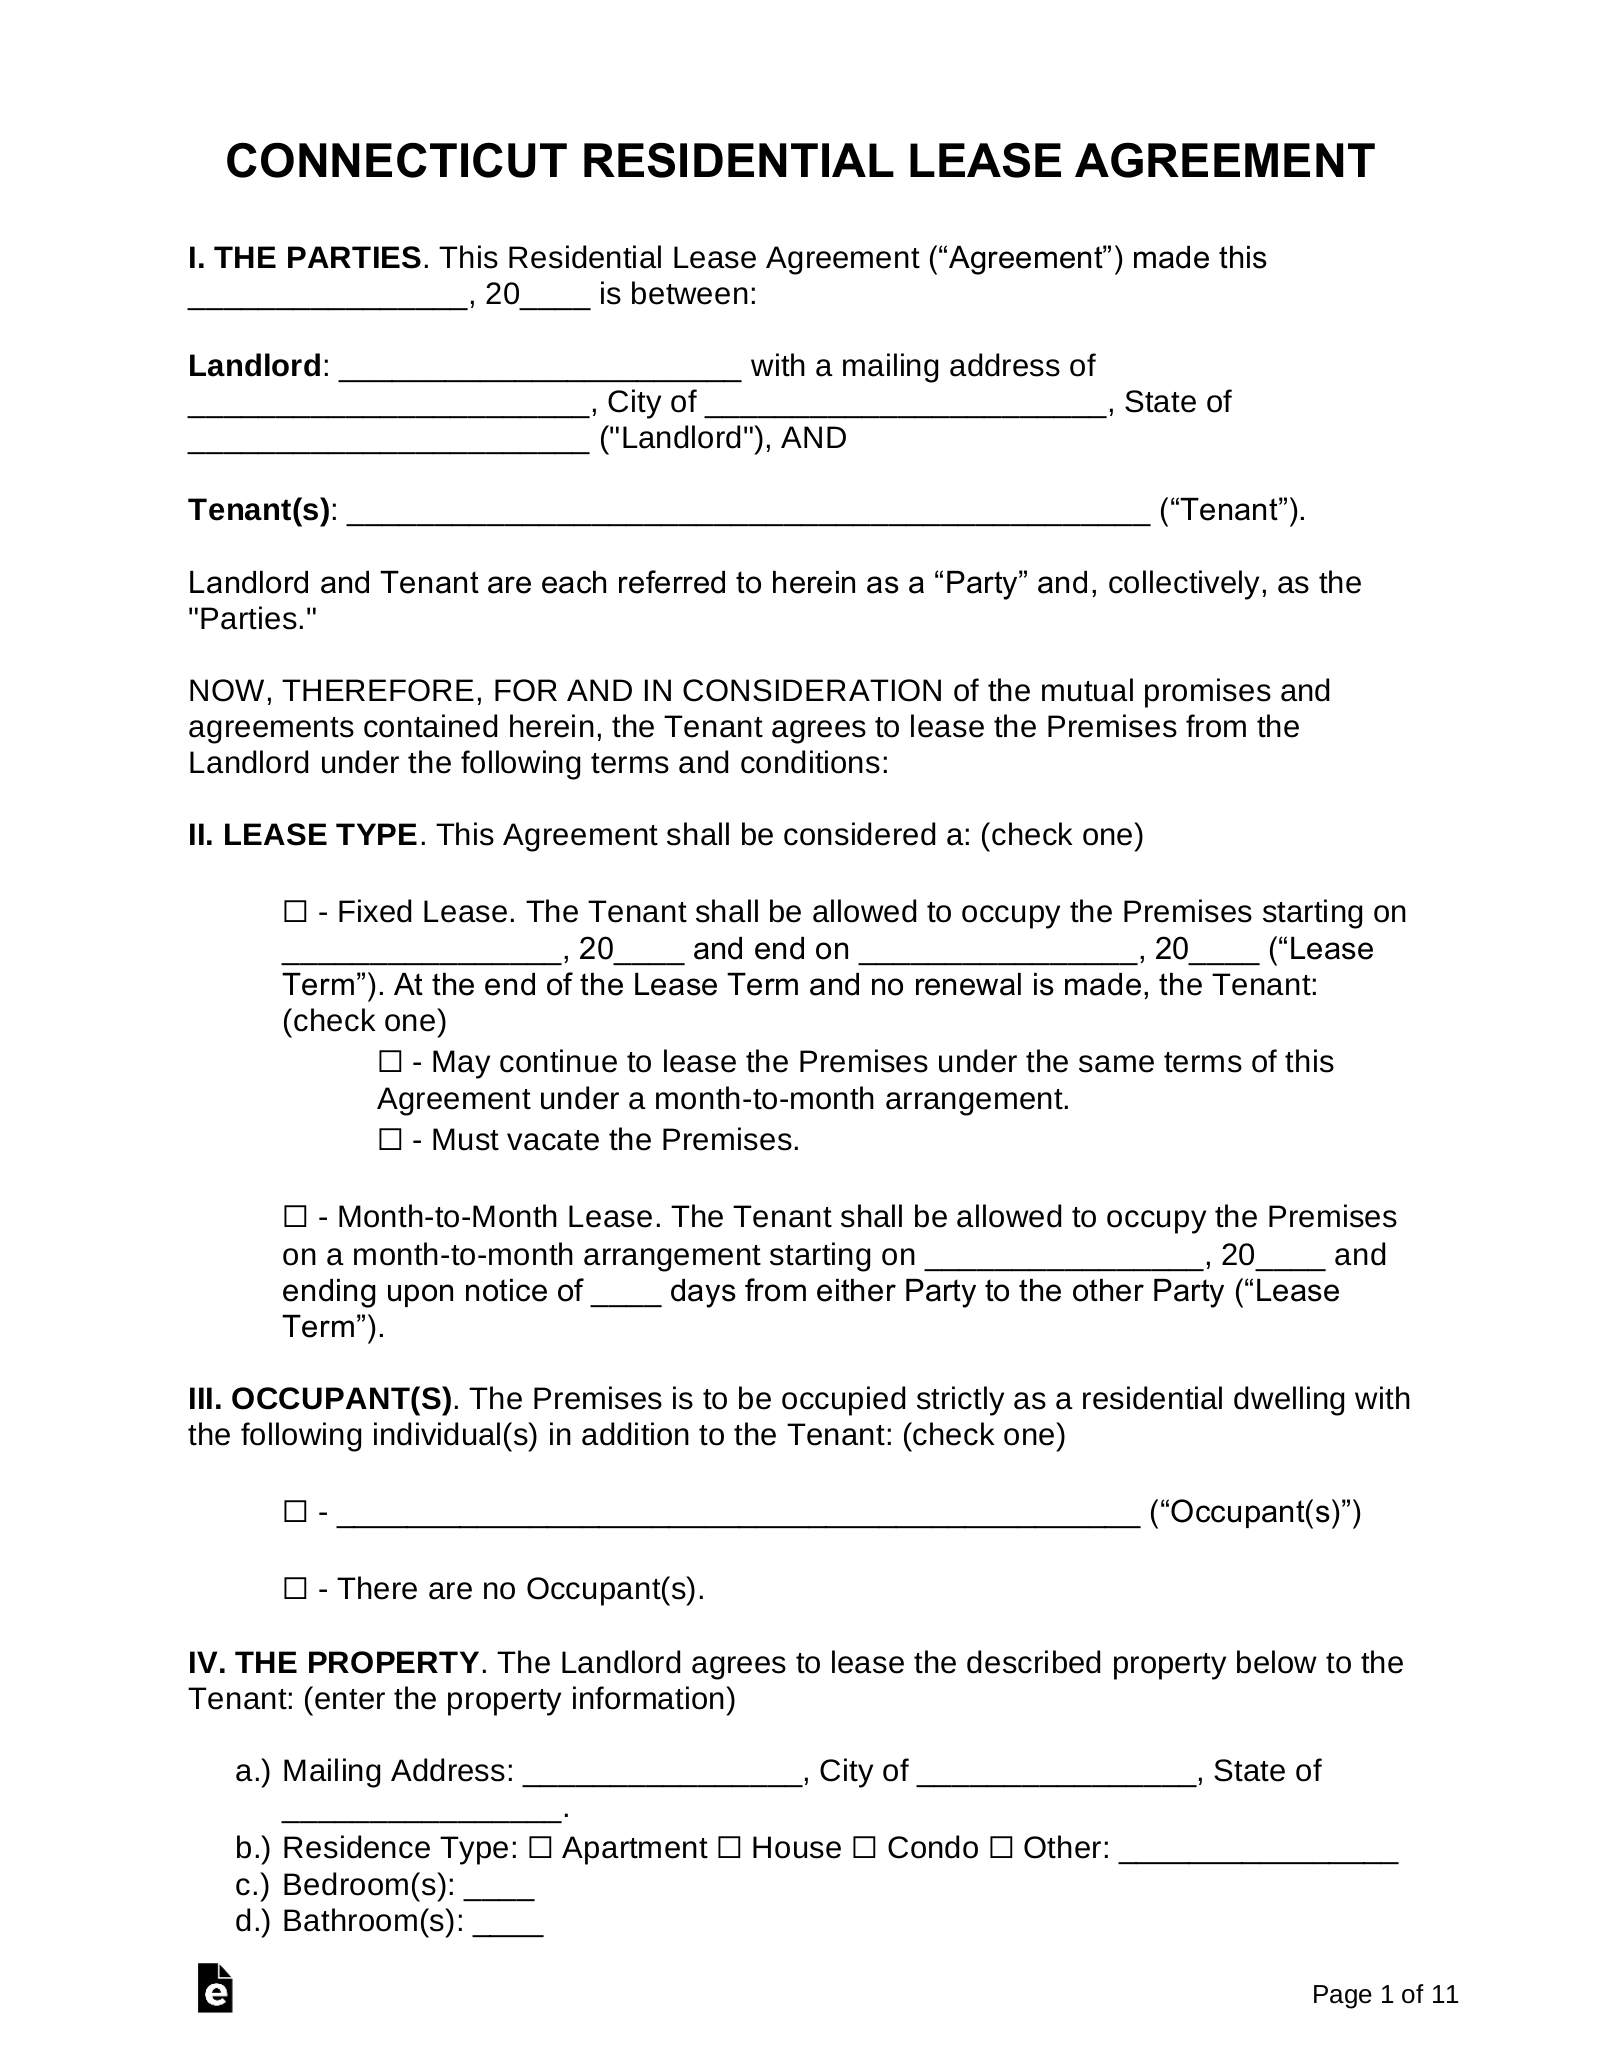 eForms Connecticut Residential Lease Agreement